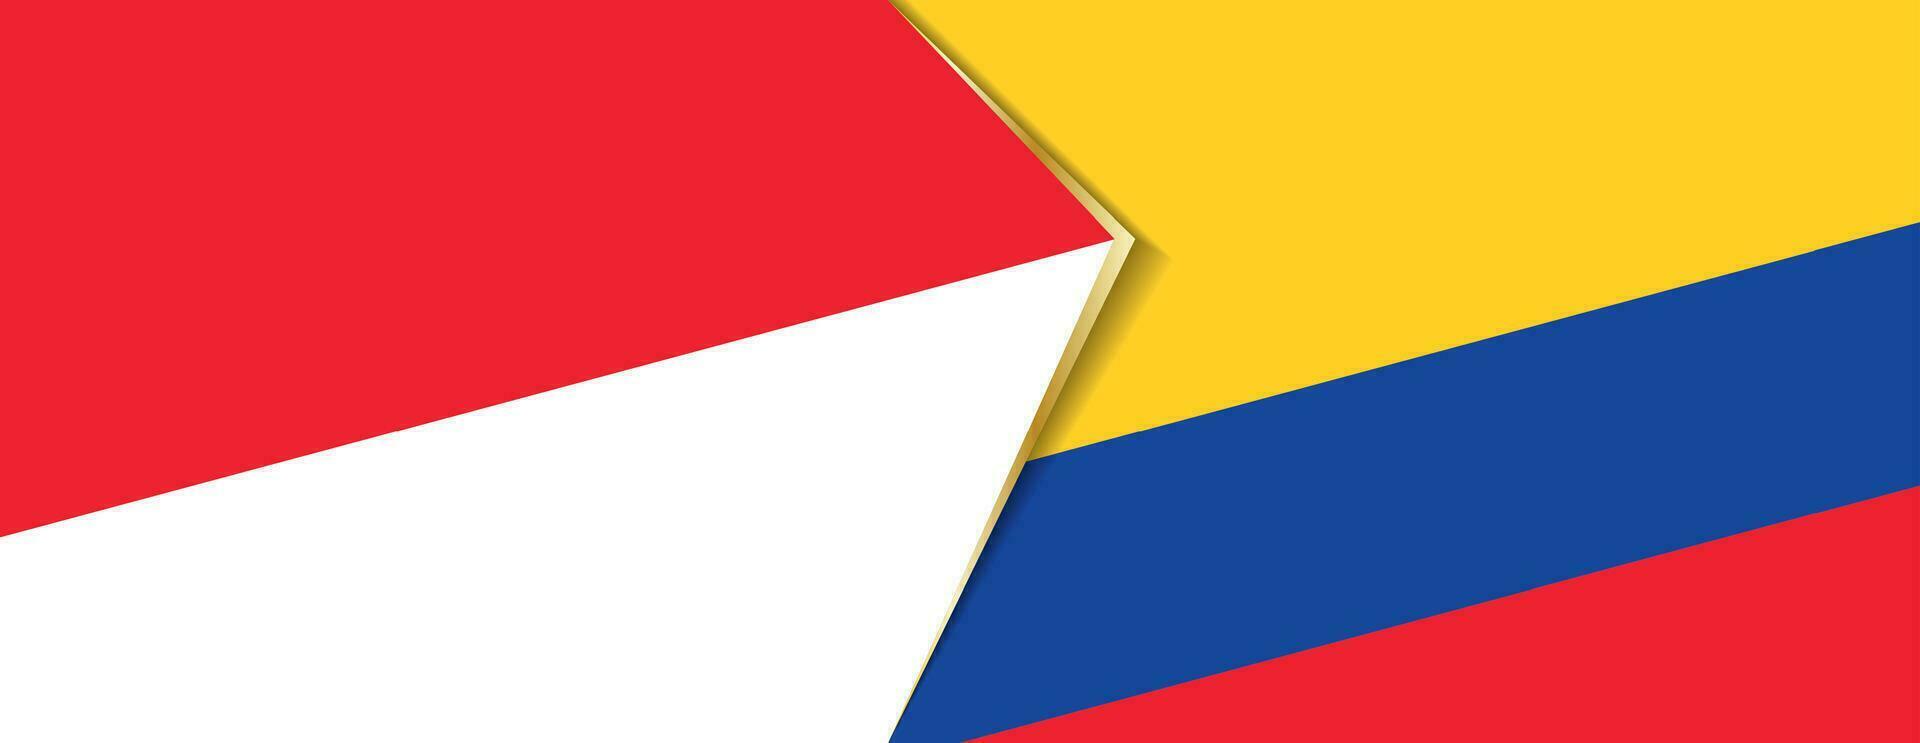 Indonesia and Colombia flags, two vector flags.